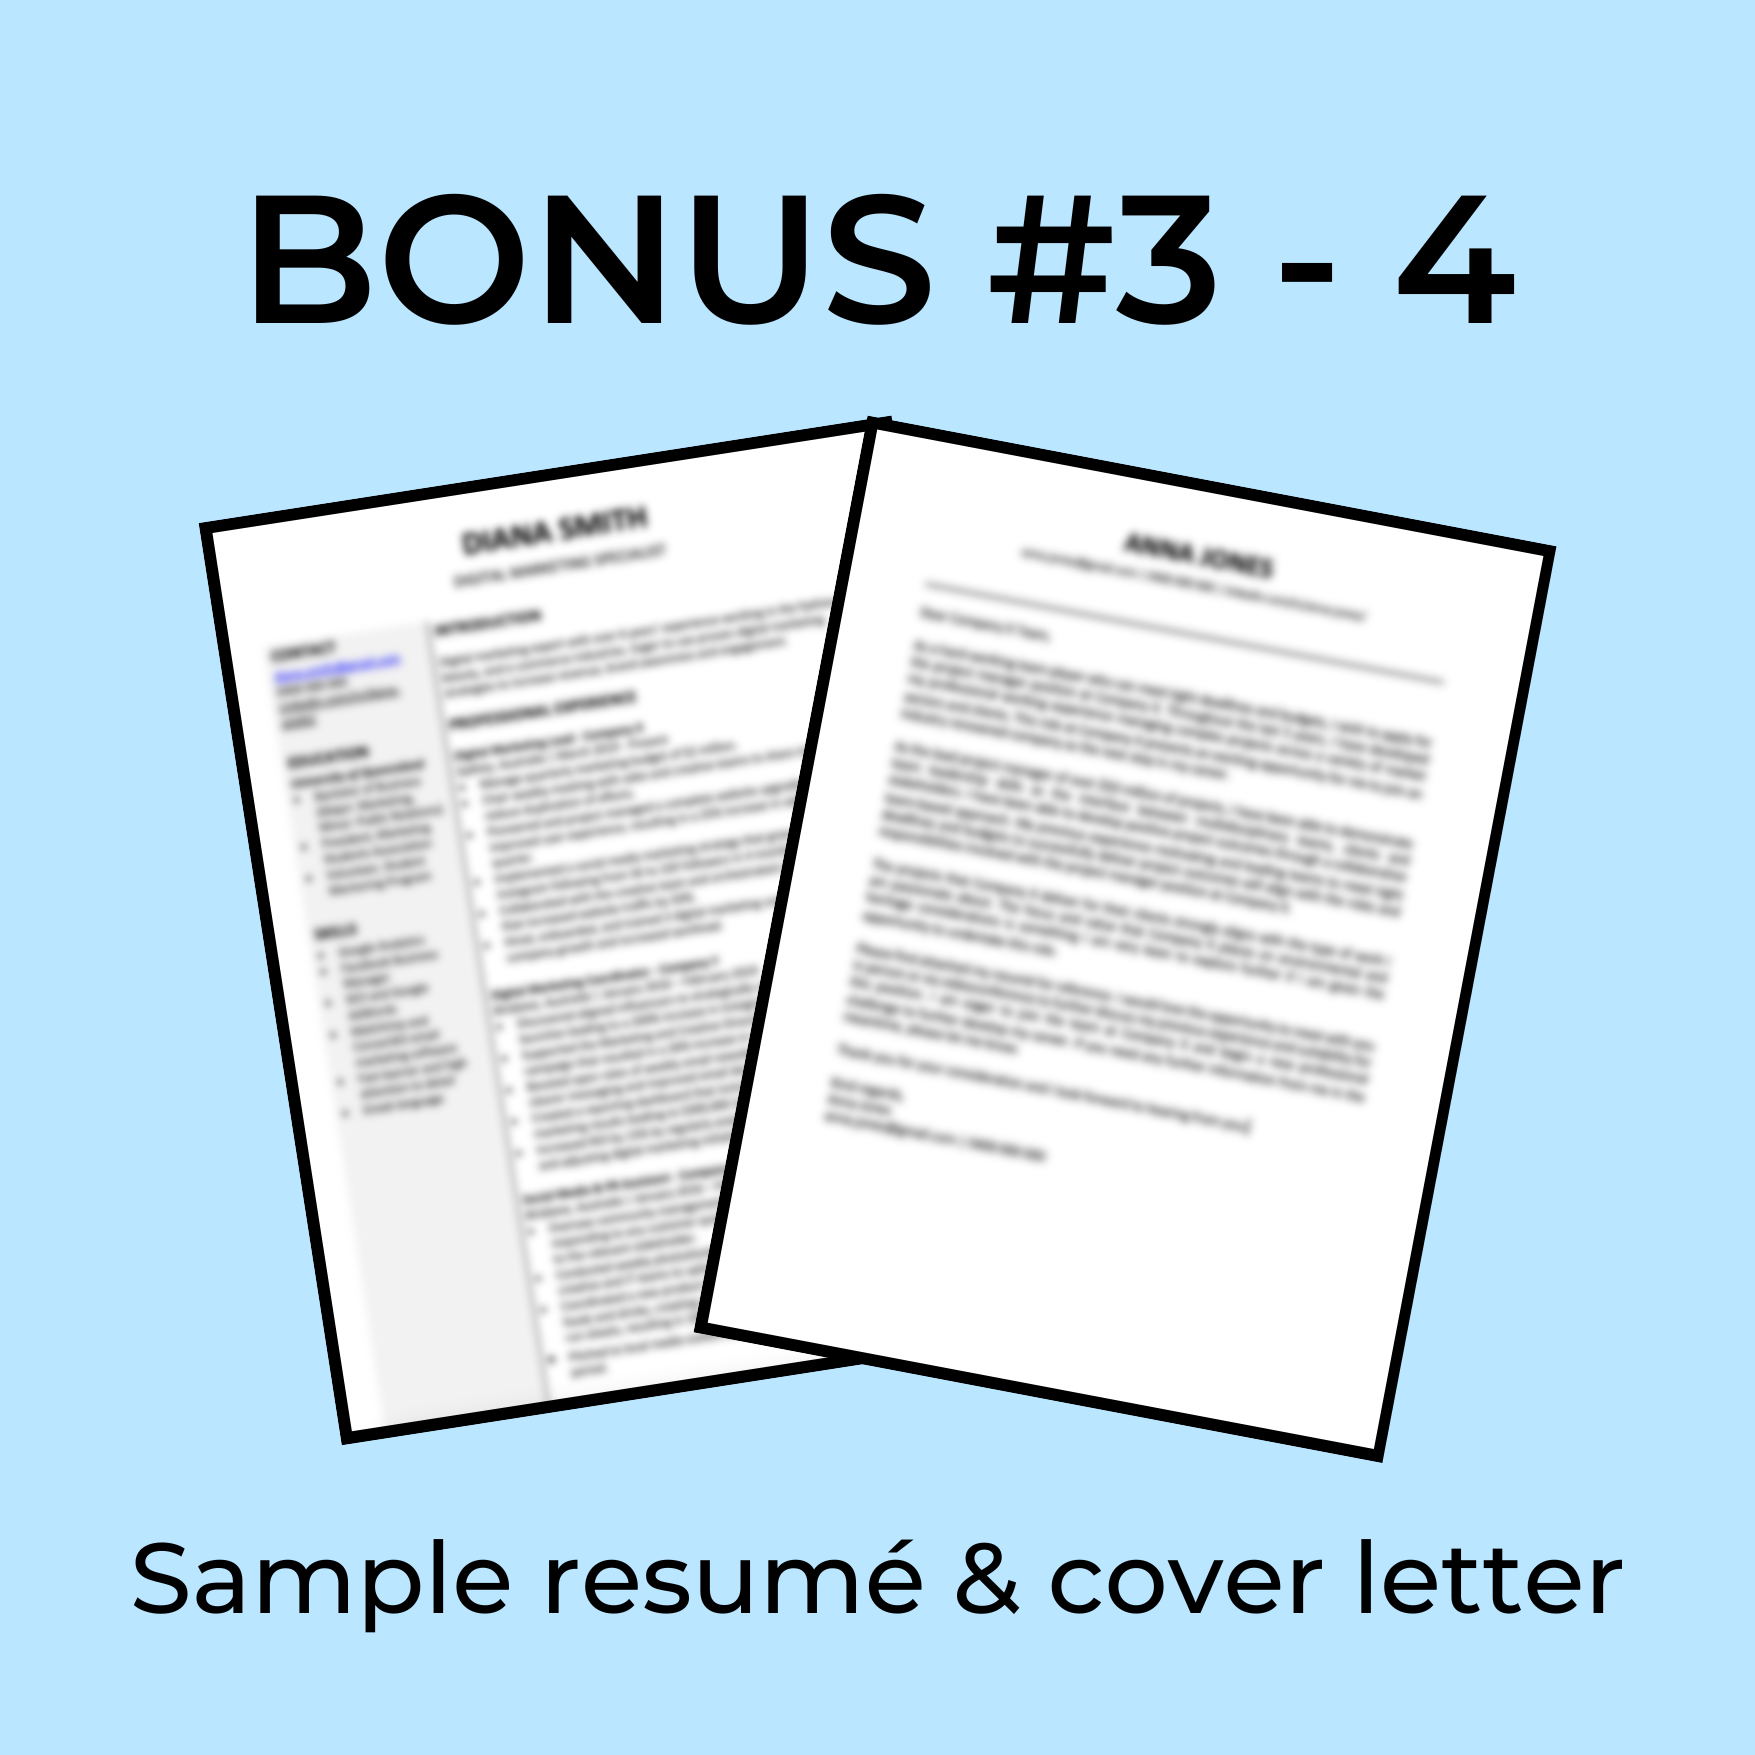 WRITING A WINNING RESUMÉ & COVER LETTER GAME PLAN